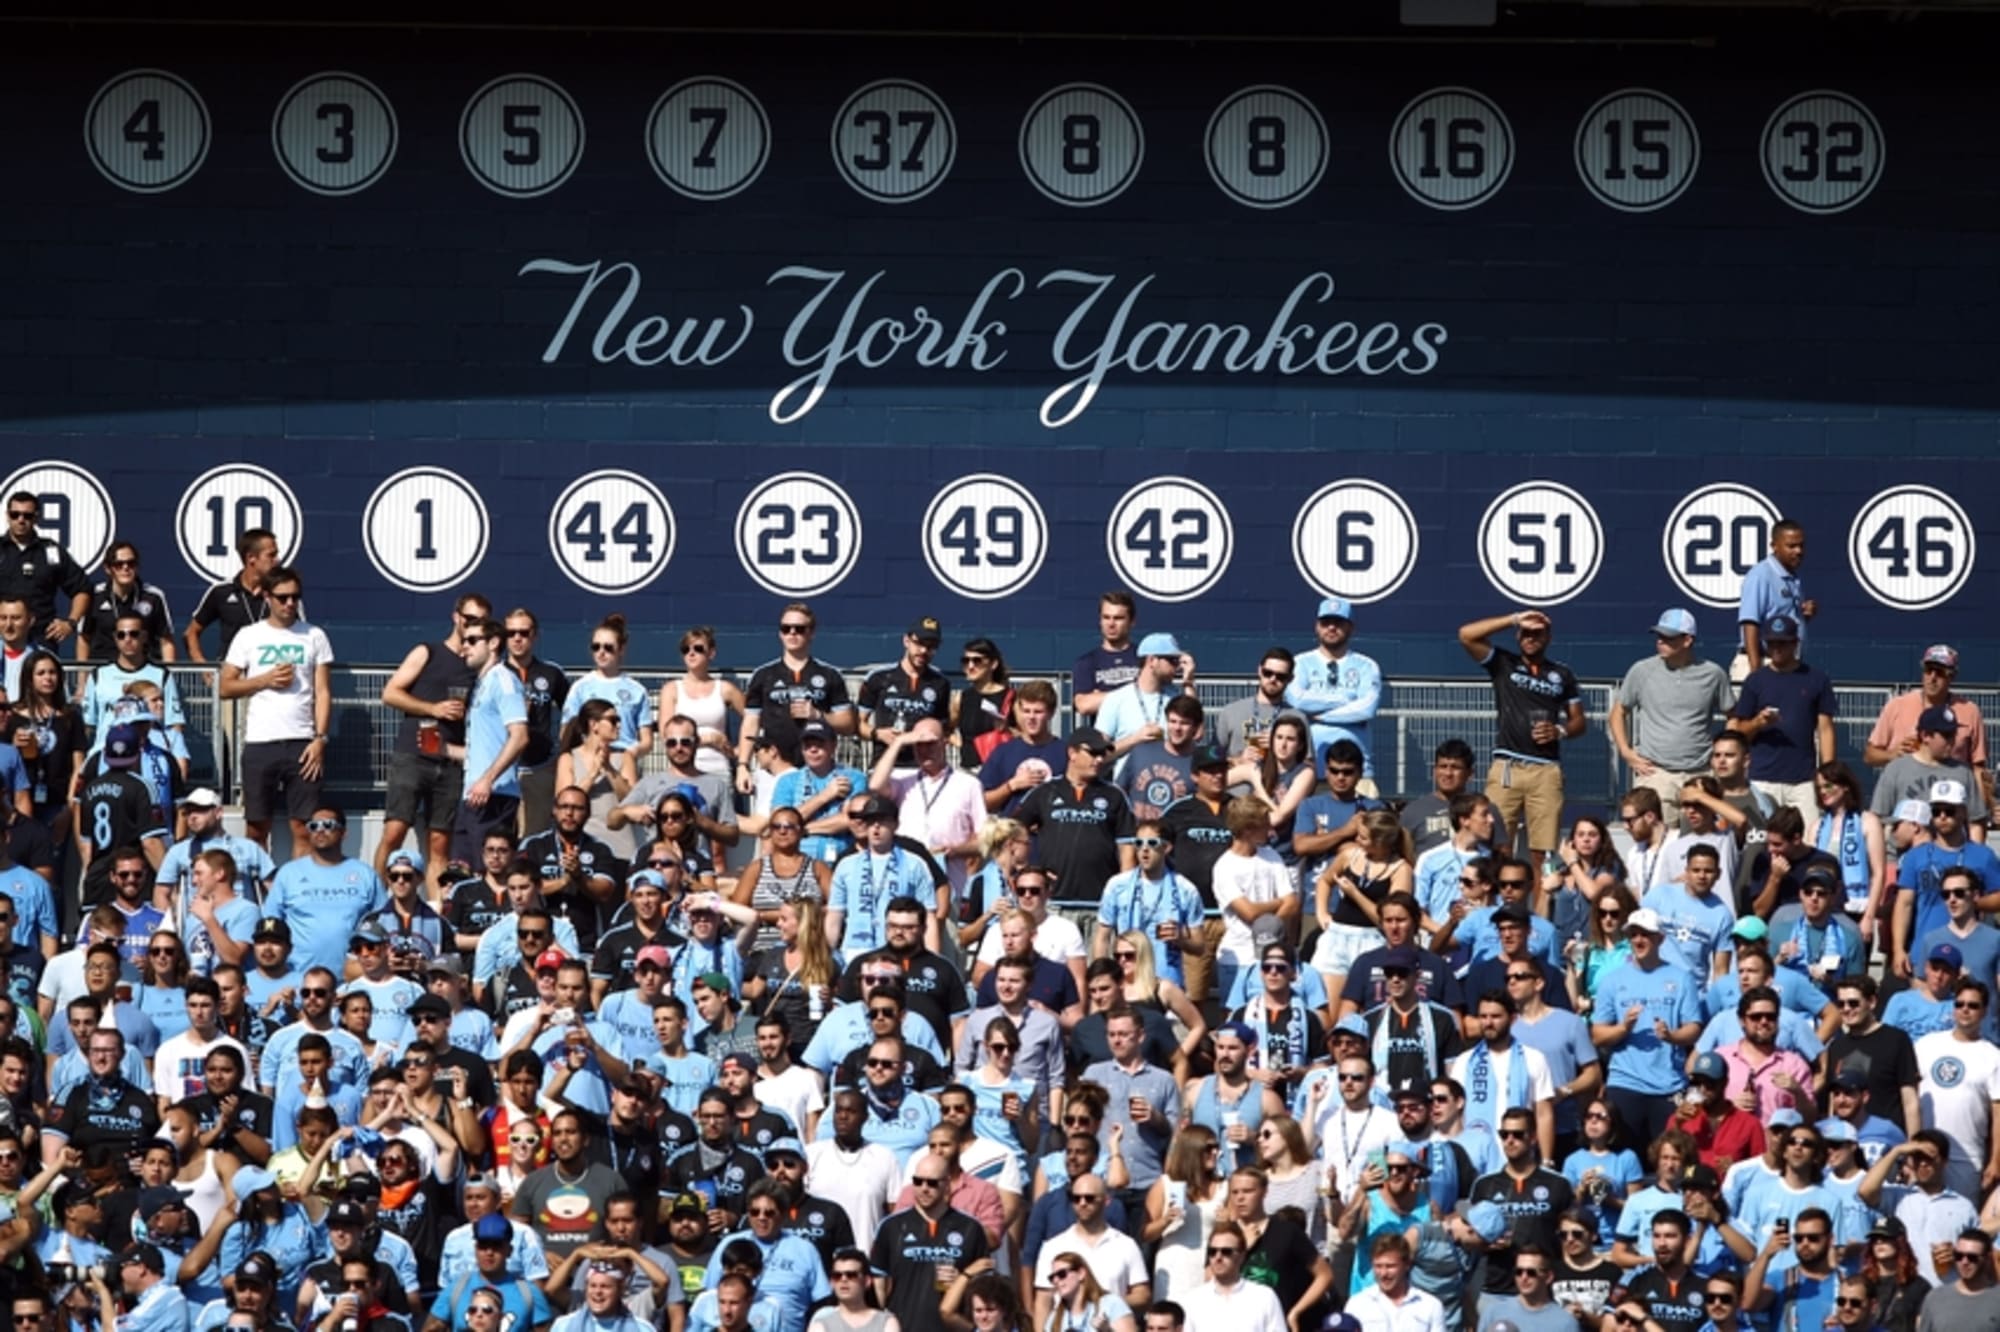 History of retired numbers dates back to Lou Gehrig Day